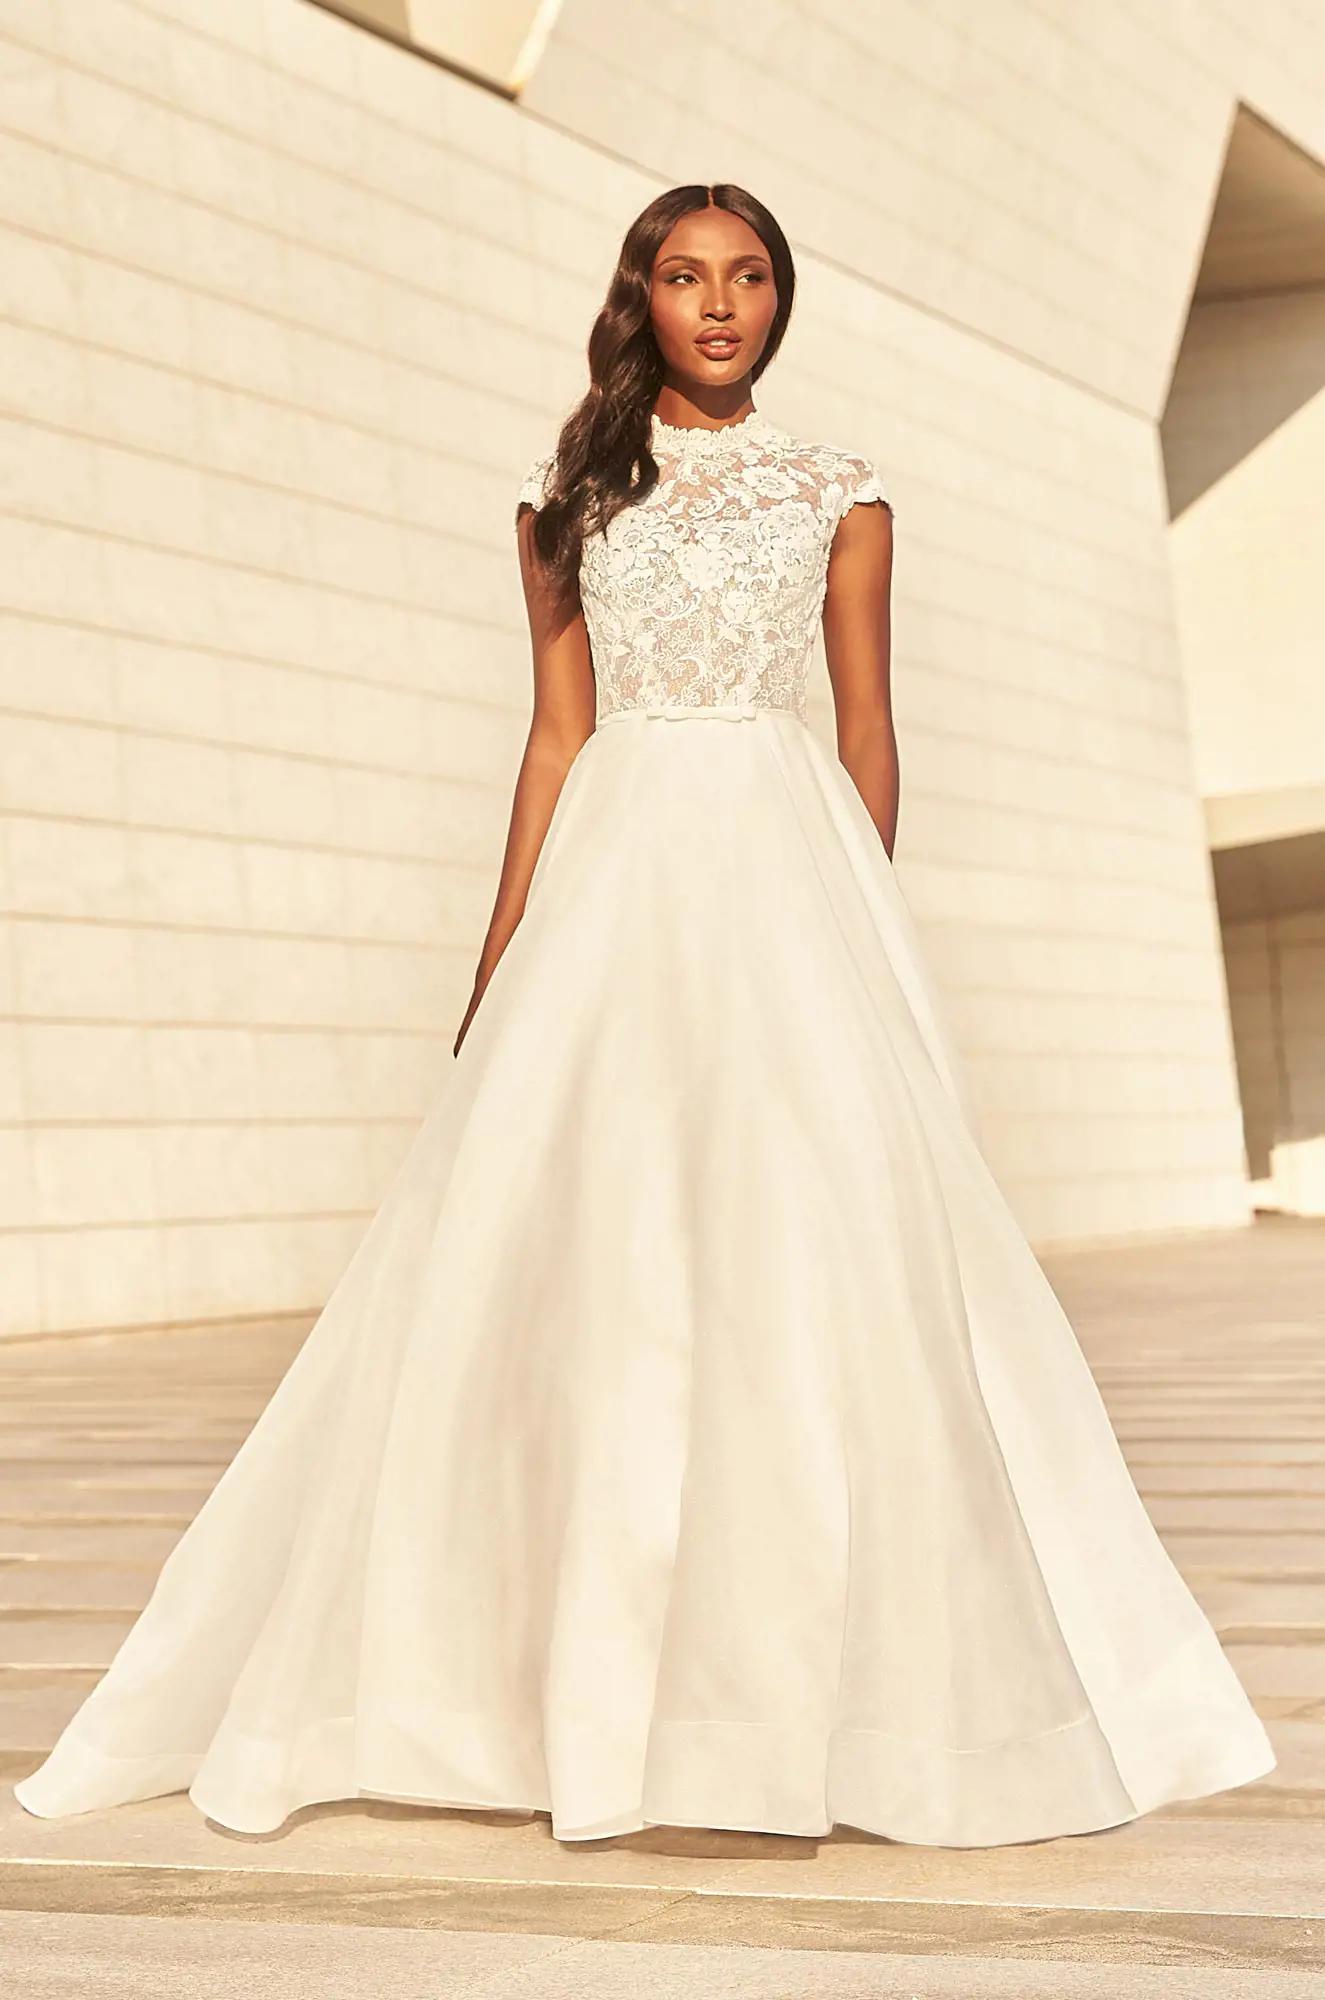 Trending Bridal Gowns Image